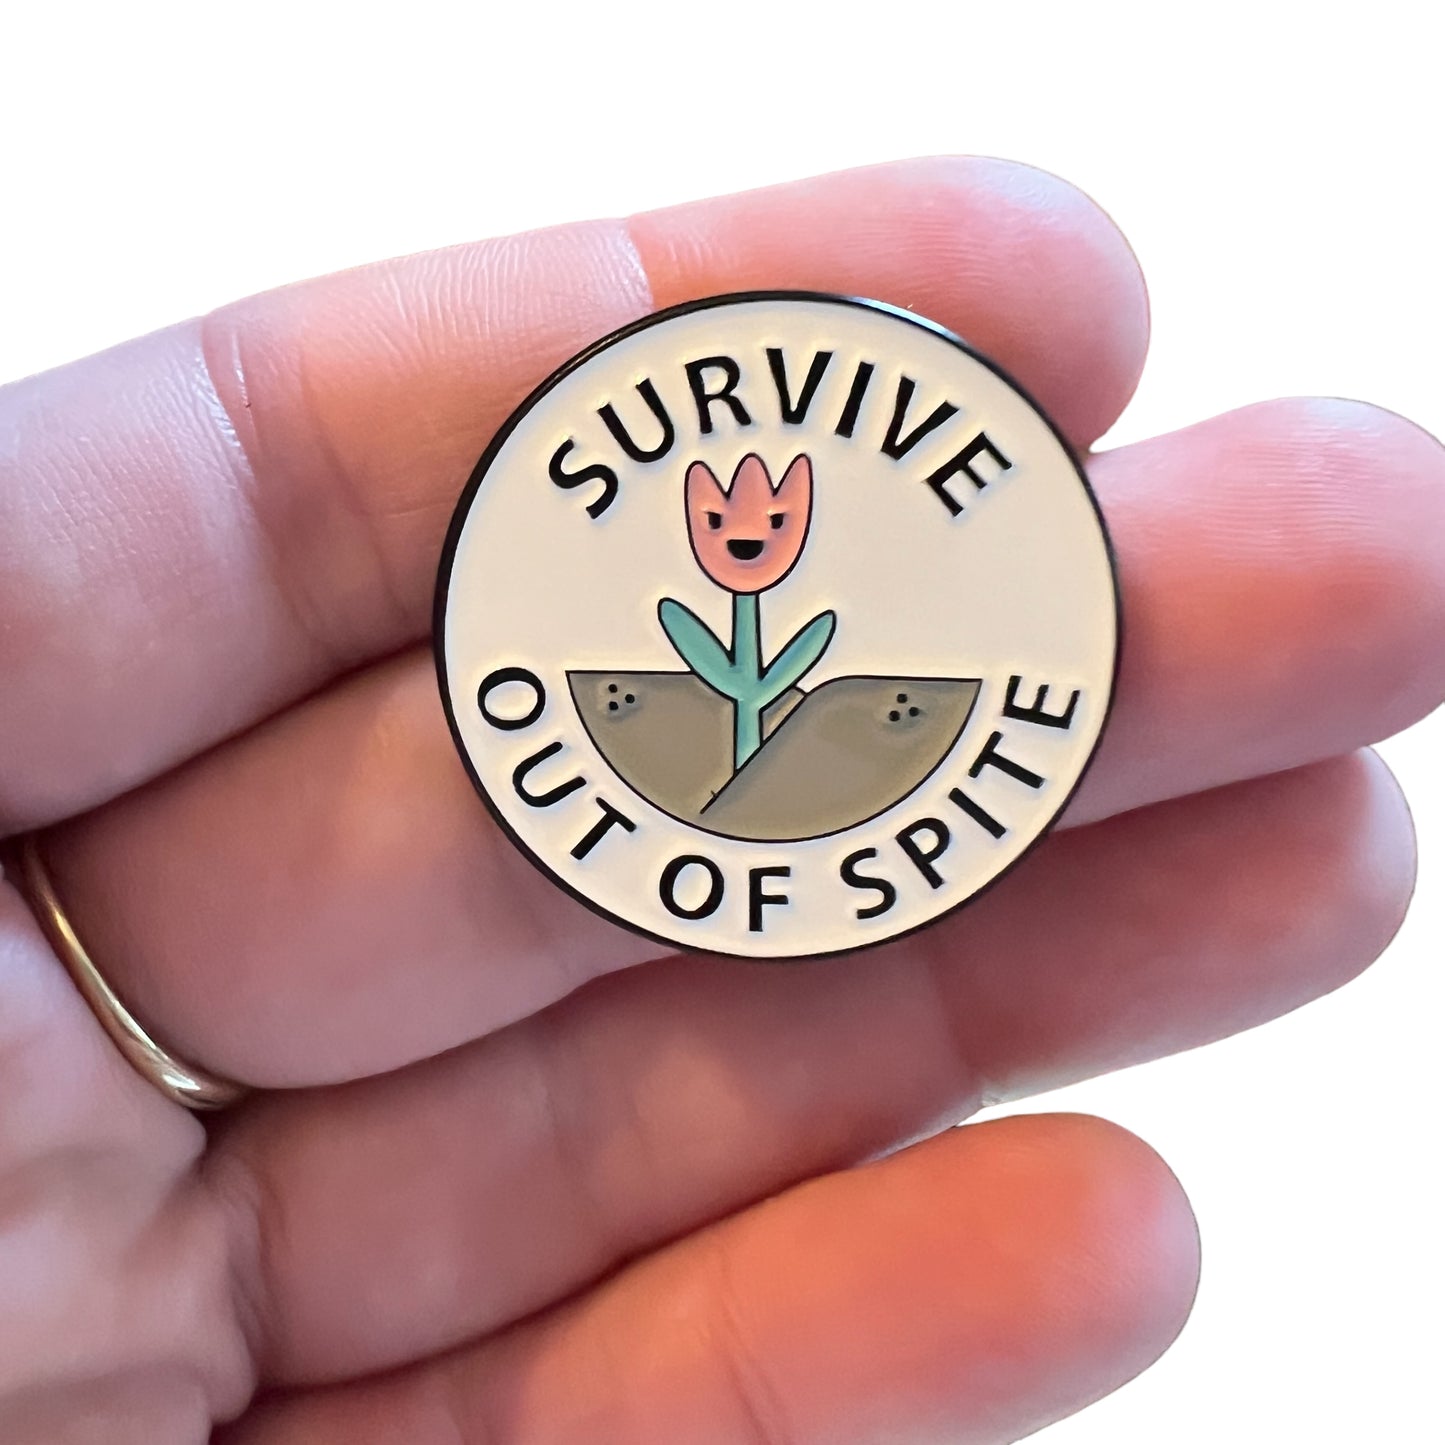 Pin — Survive out of Spite